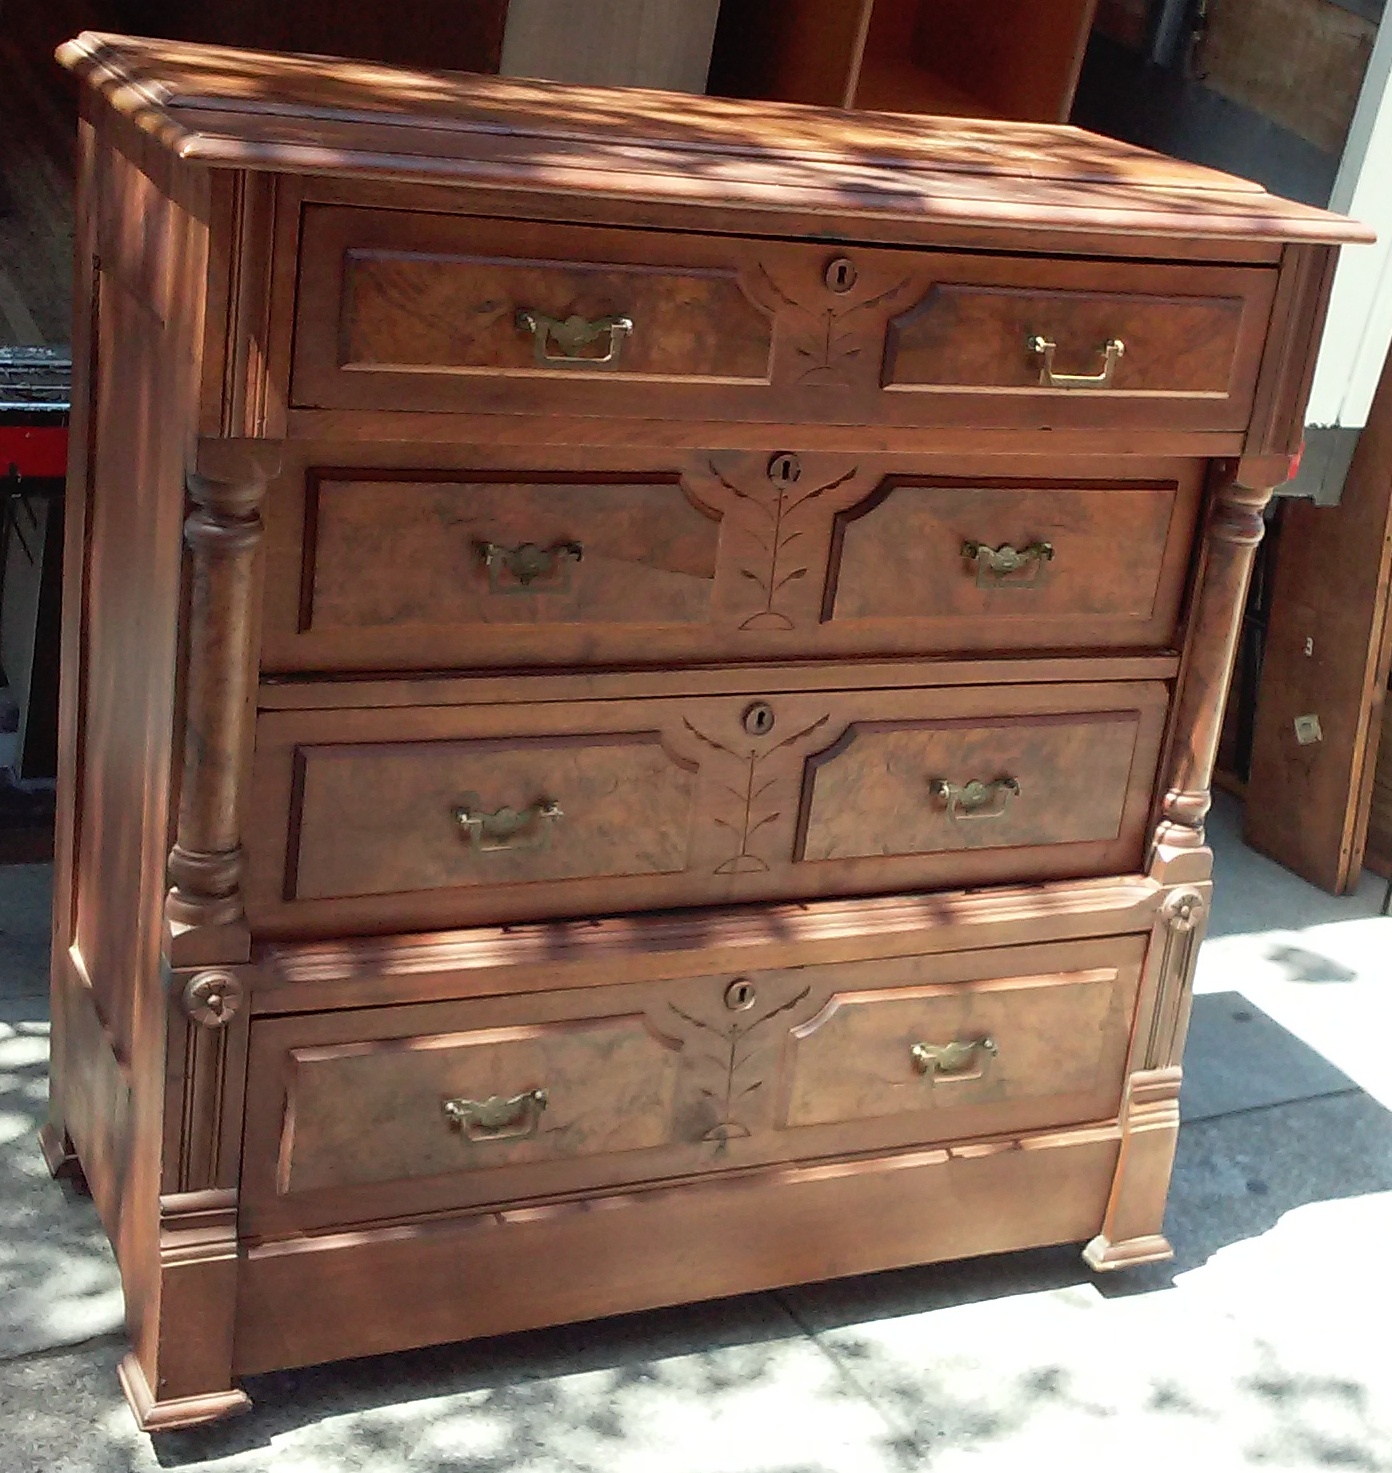 UHURU FURNITURE & COLLECTIBLES: SOLD 3 1/2' Eastlake Chest of Drawers ...